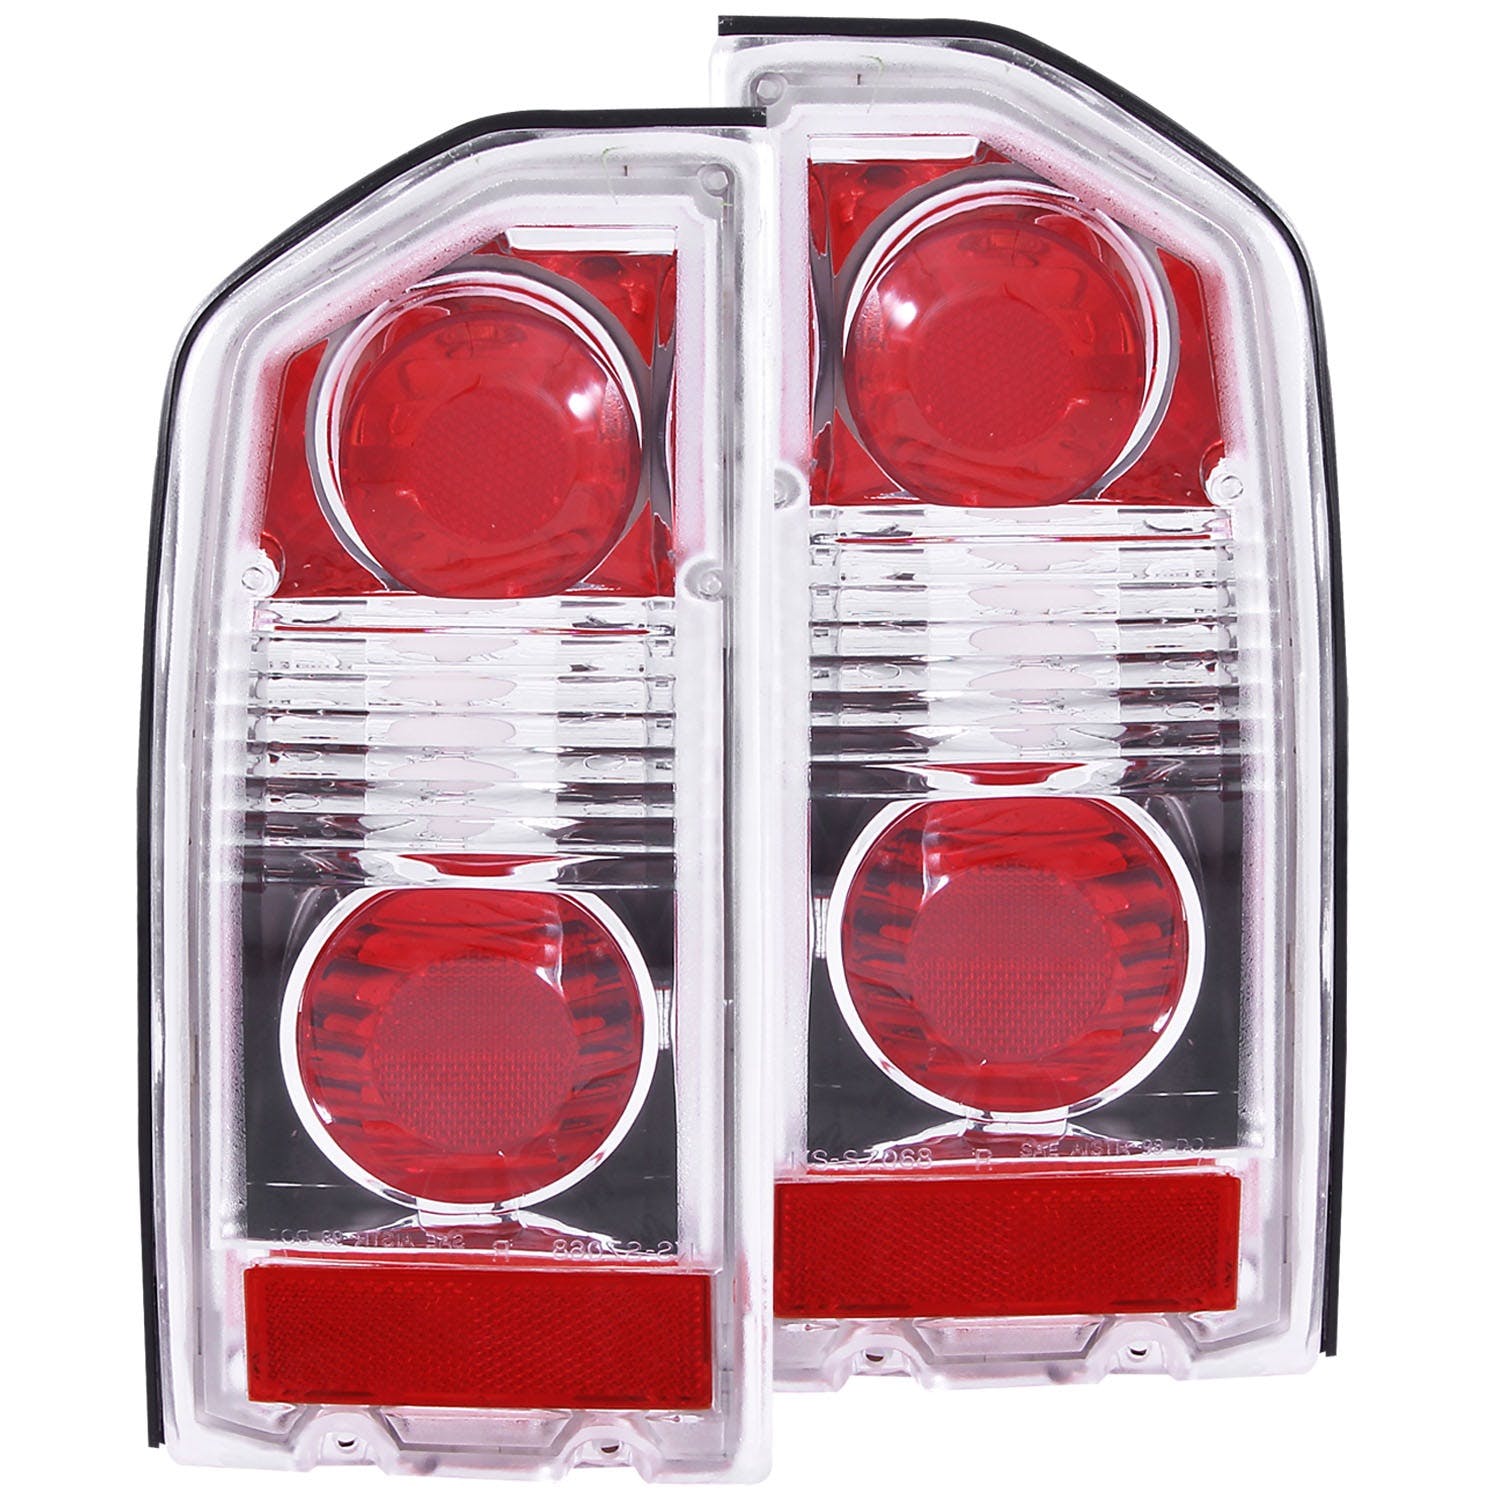 AnzoUSA 211133 Taillights Chrome